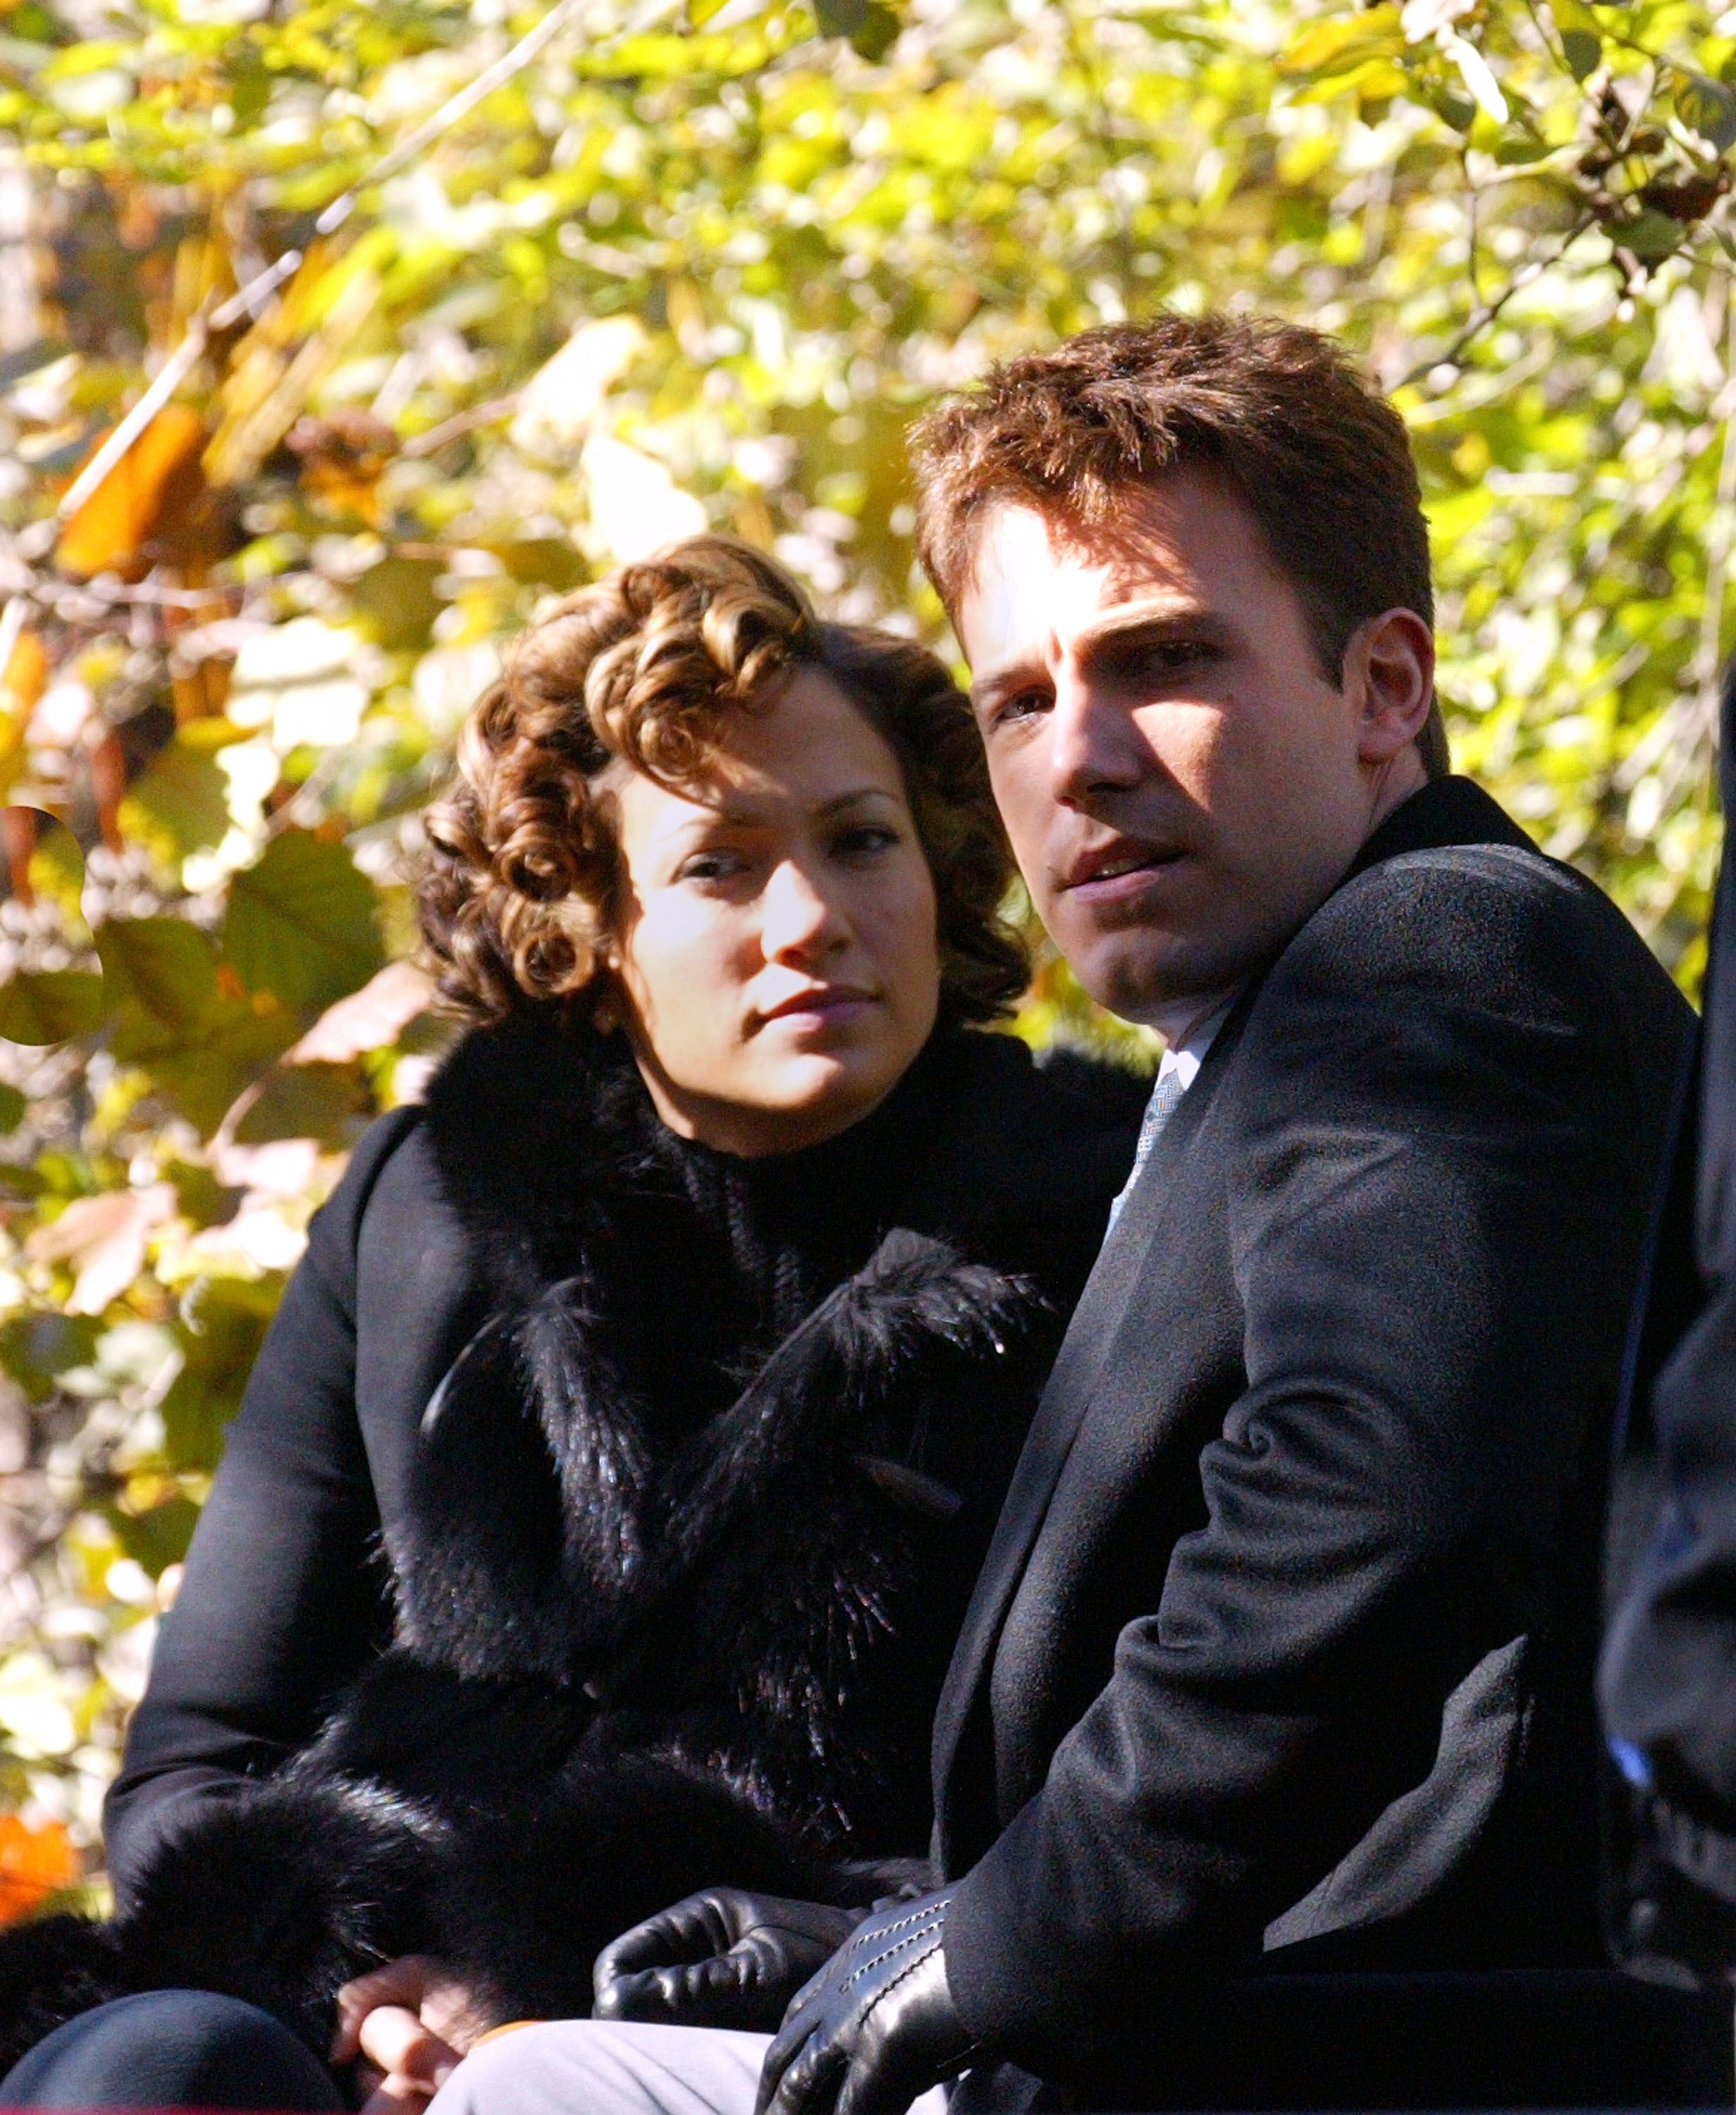 Jennifer Lopez and Ben Affleck on the set of "Jersey Girl" in Central Park on November 7, 2002, in New York City | Photo: /Getty Images